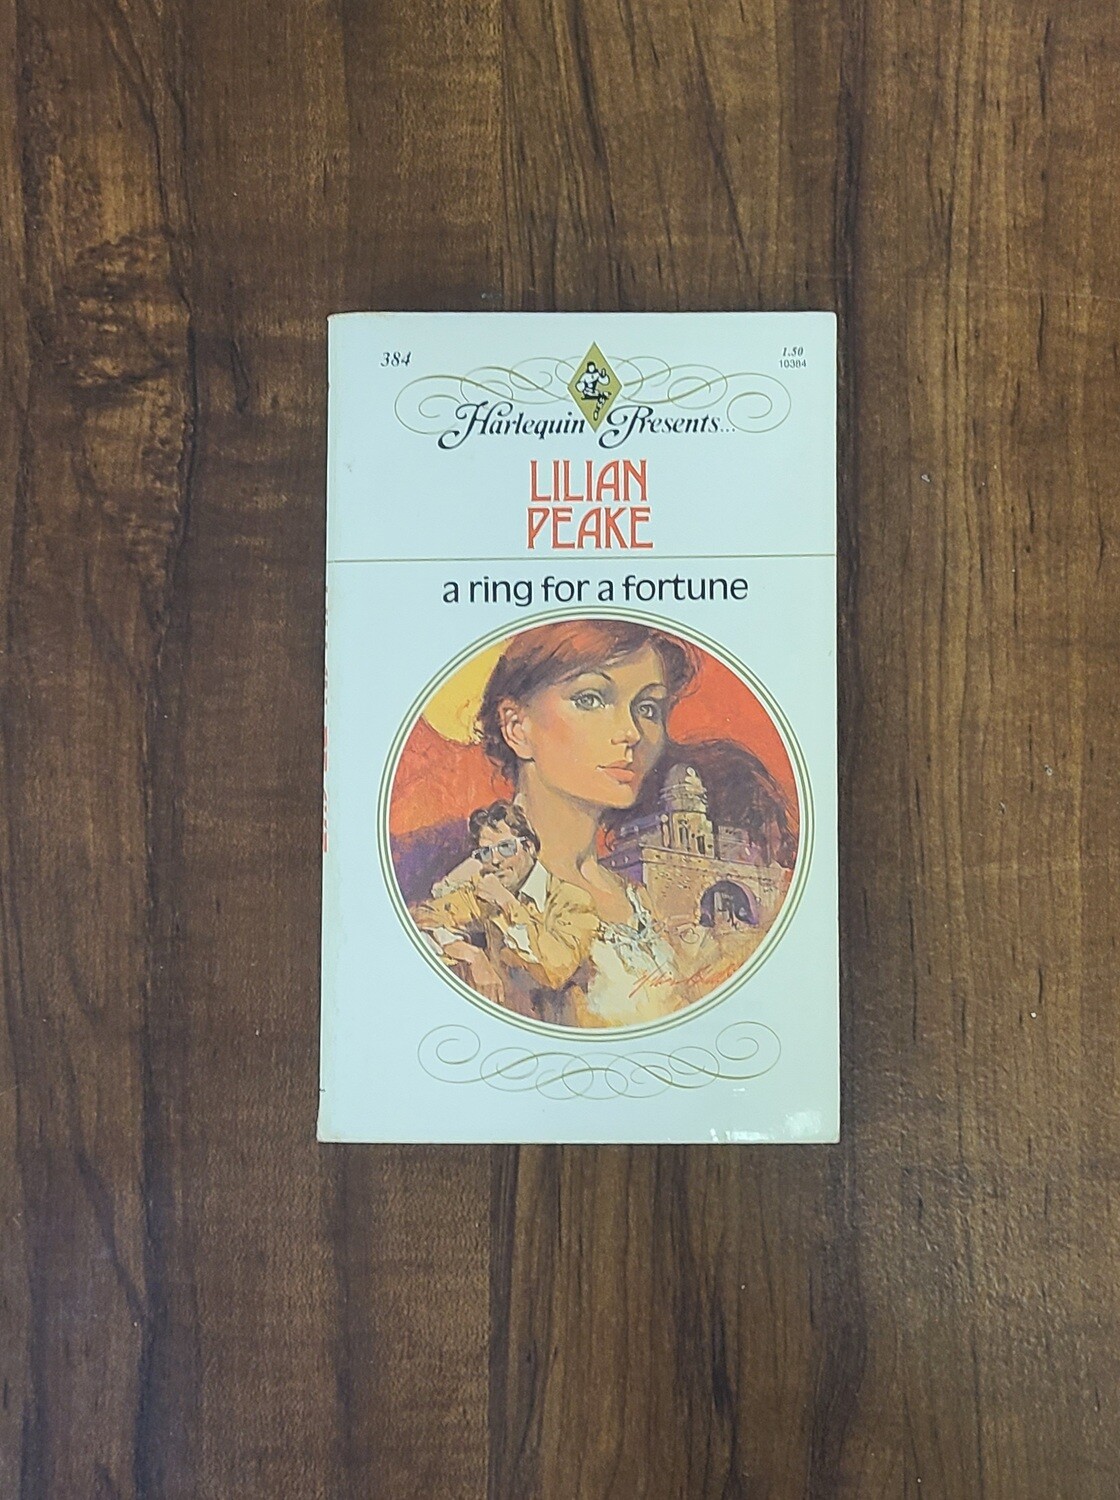 A Ring for a Fortune by Lilian Peake